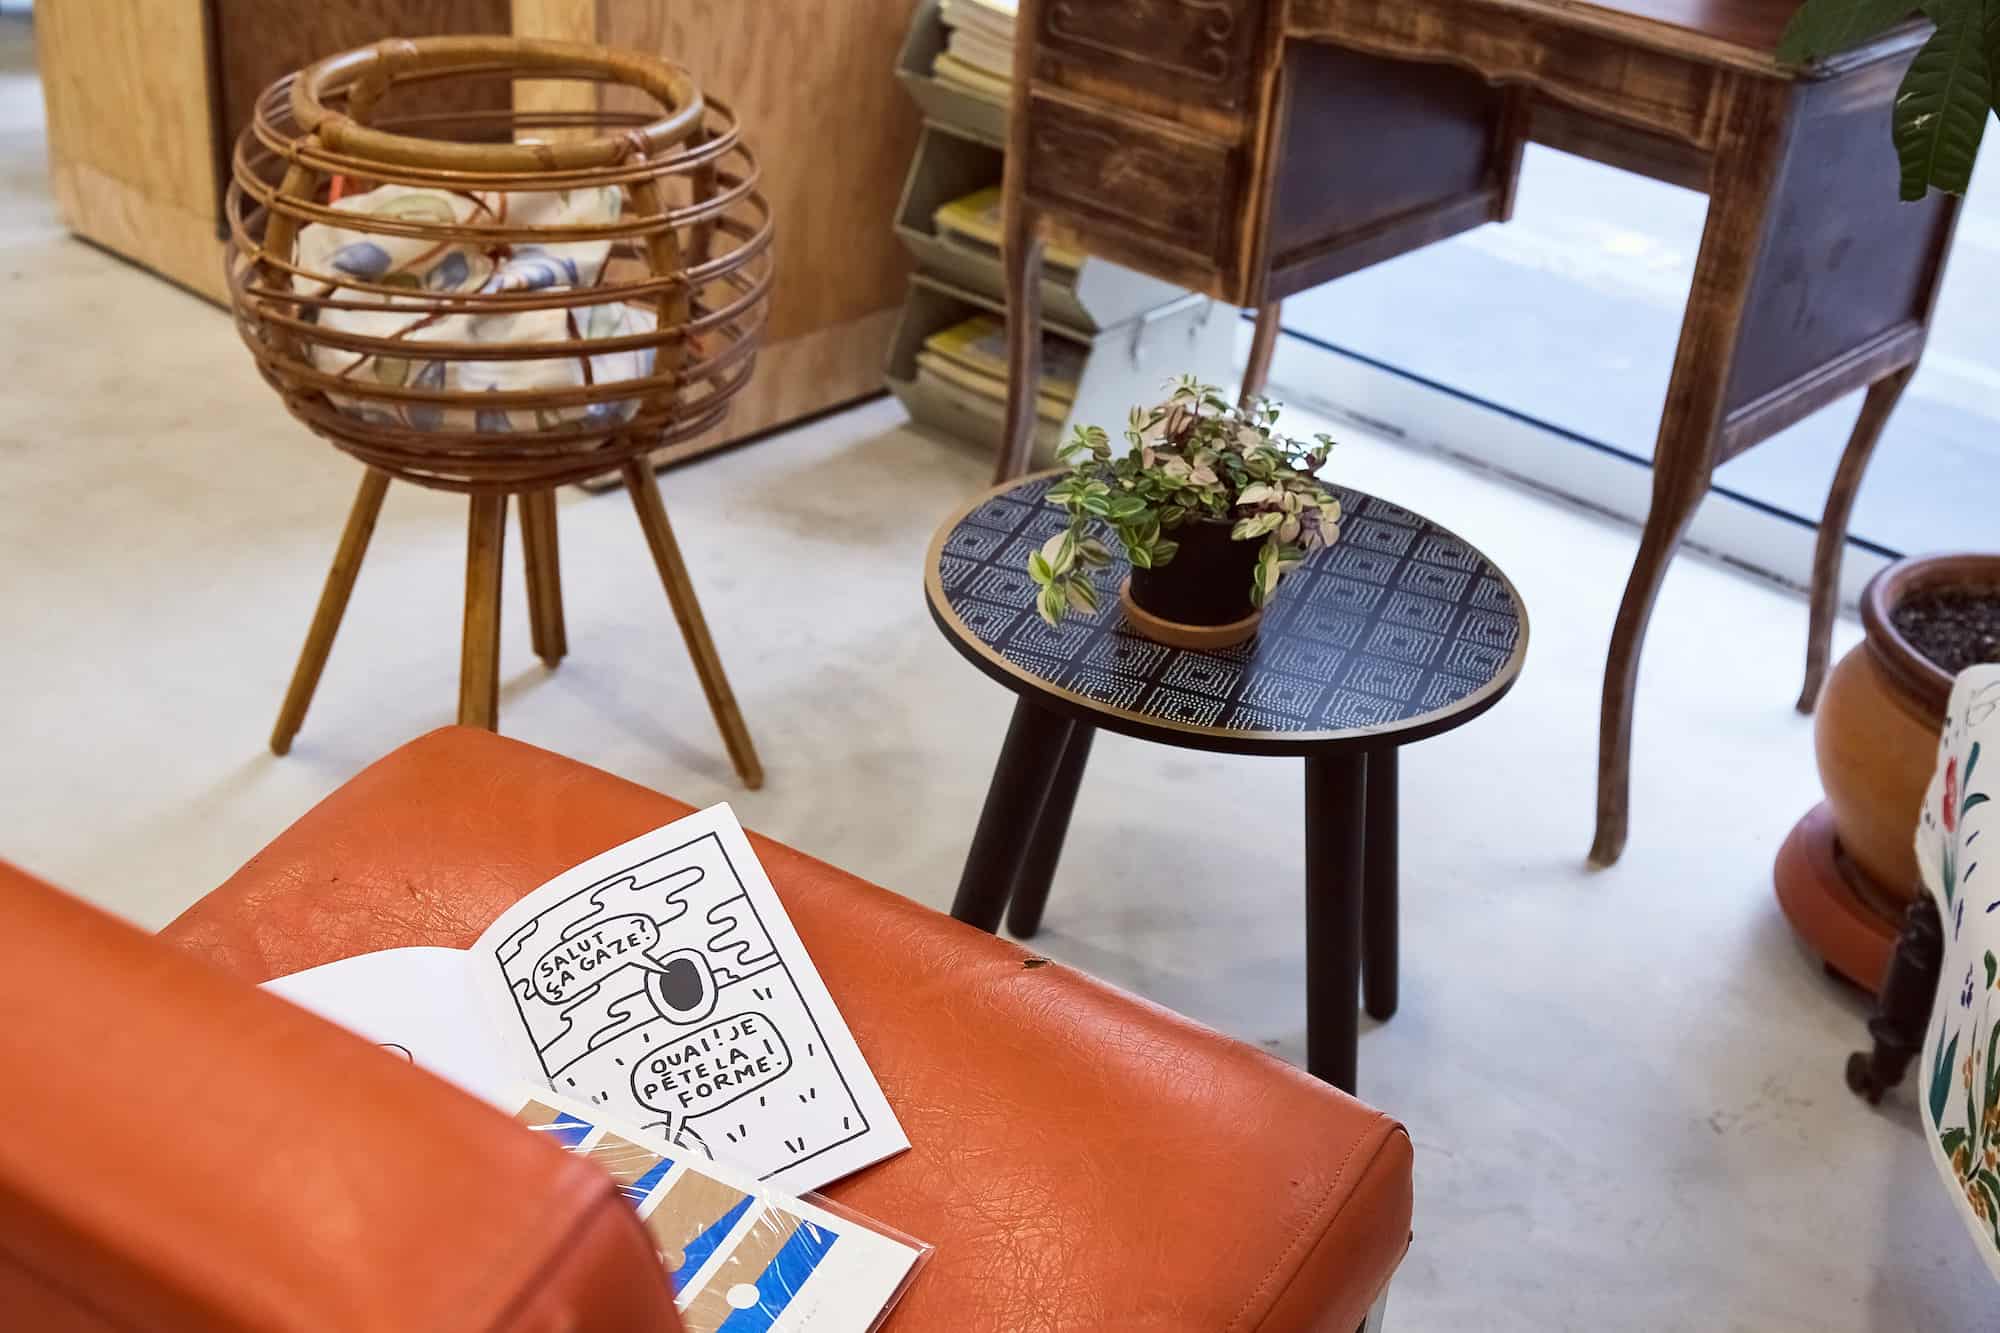 Inisde Paris' vegan concept store Aujourd'hui Demain, you'll find handcrafted furniture like this orange faux-leather armchair and coffee table.